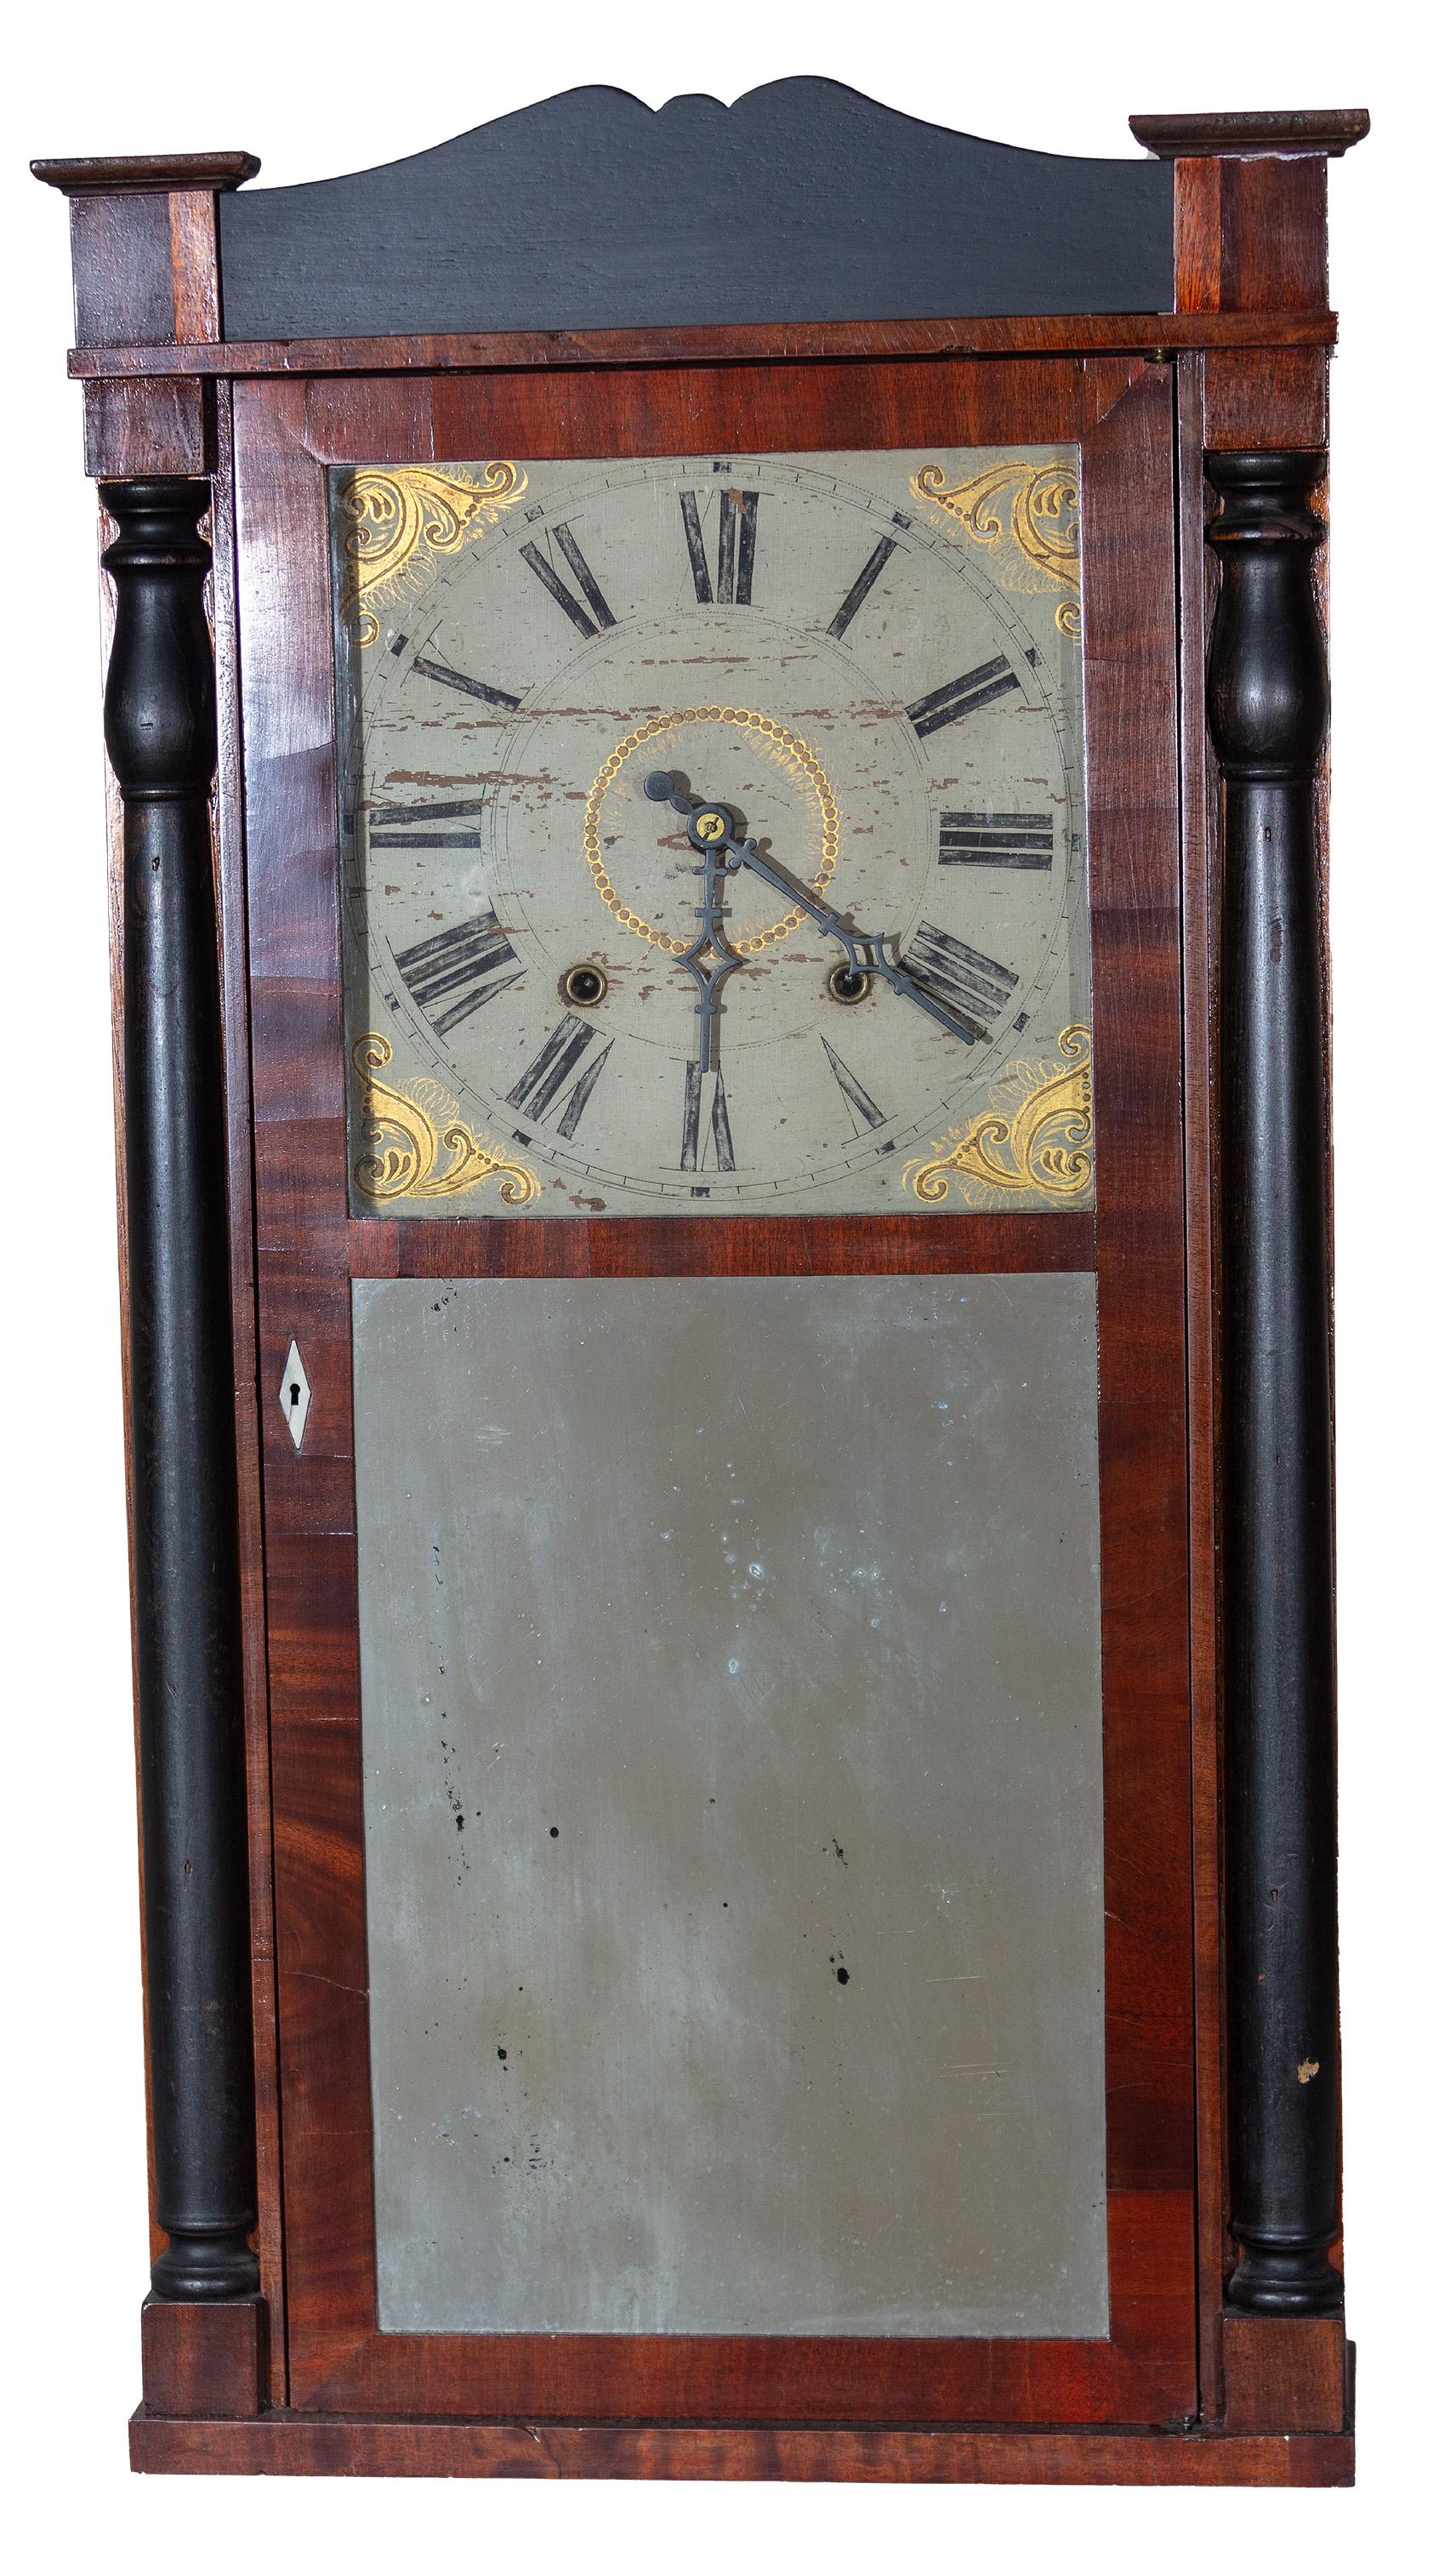 "30 Hour Clock, " Wooden Gears with Original Face, Glass, & Mirror - Art by Jeromes & Darrow